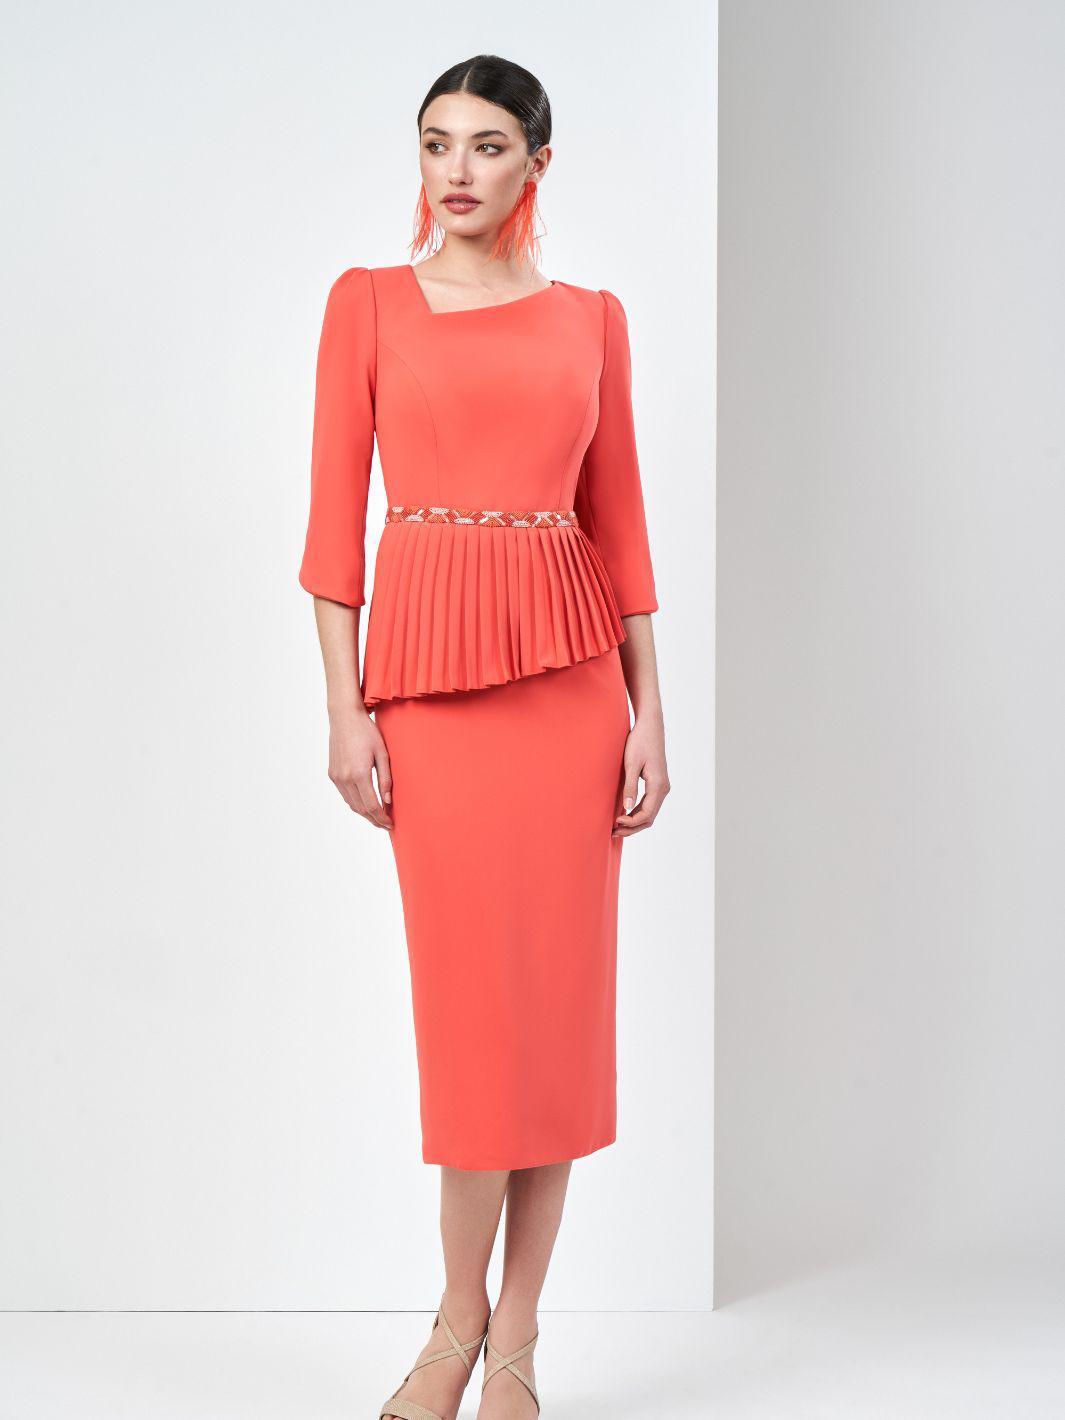 Sonia Pena Dress 11240006A In Coral-Mother of the bride- mother of the groom -Nicola Ross